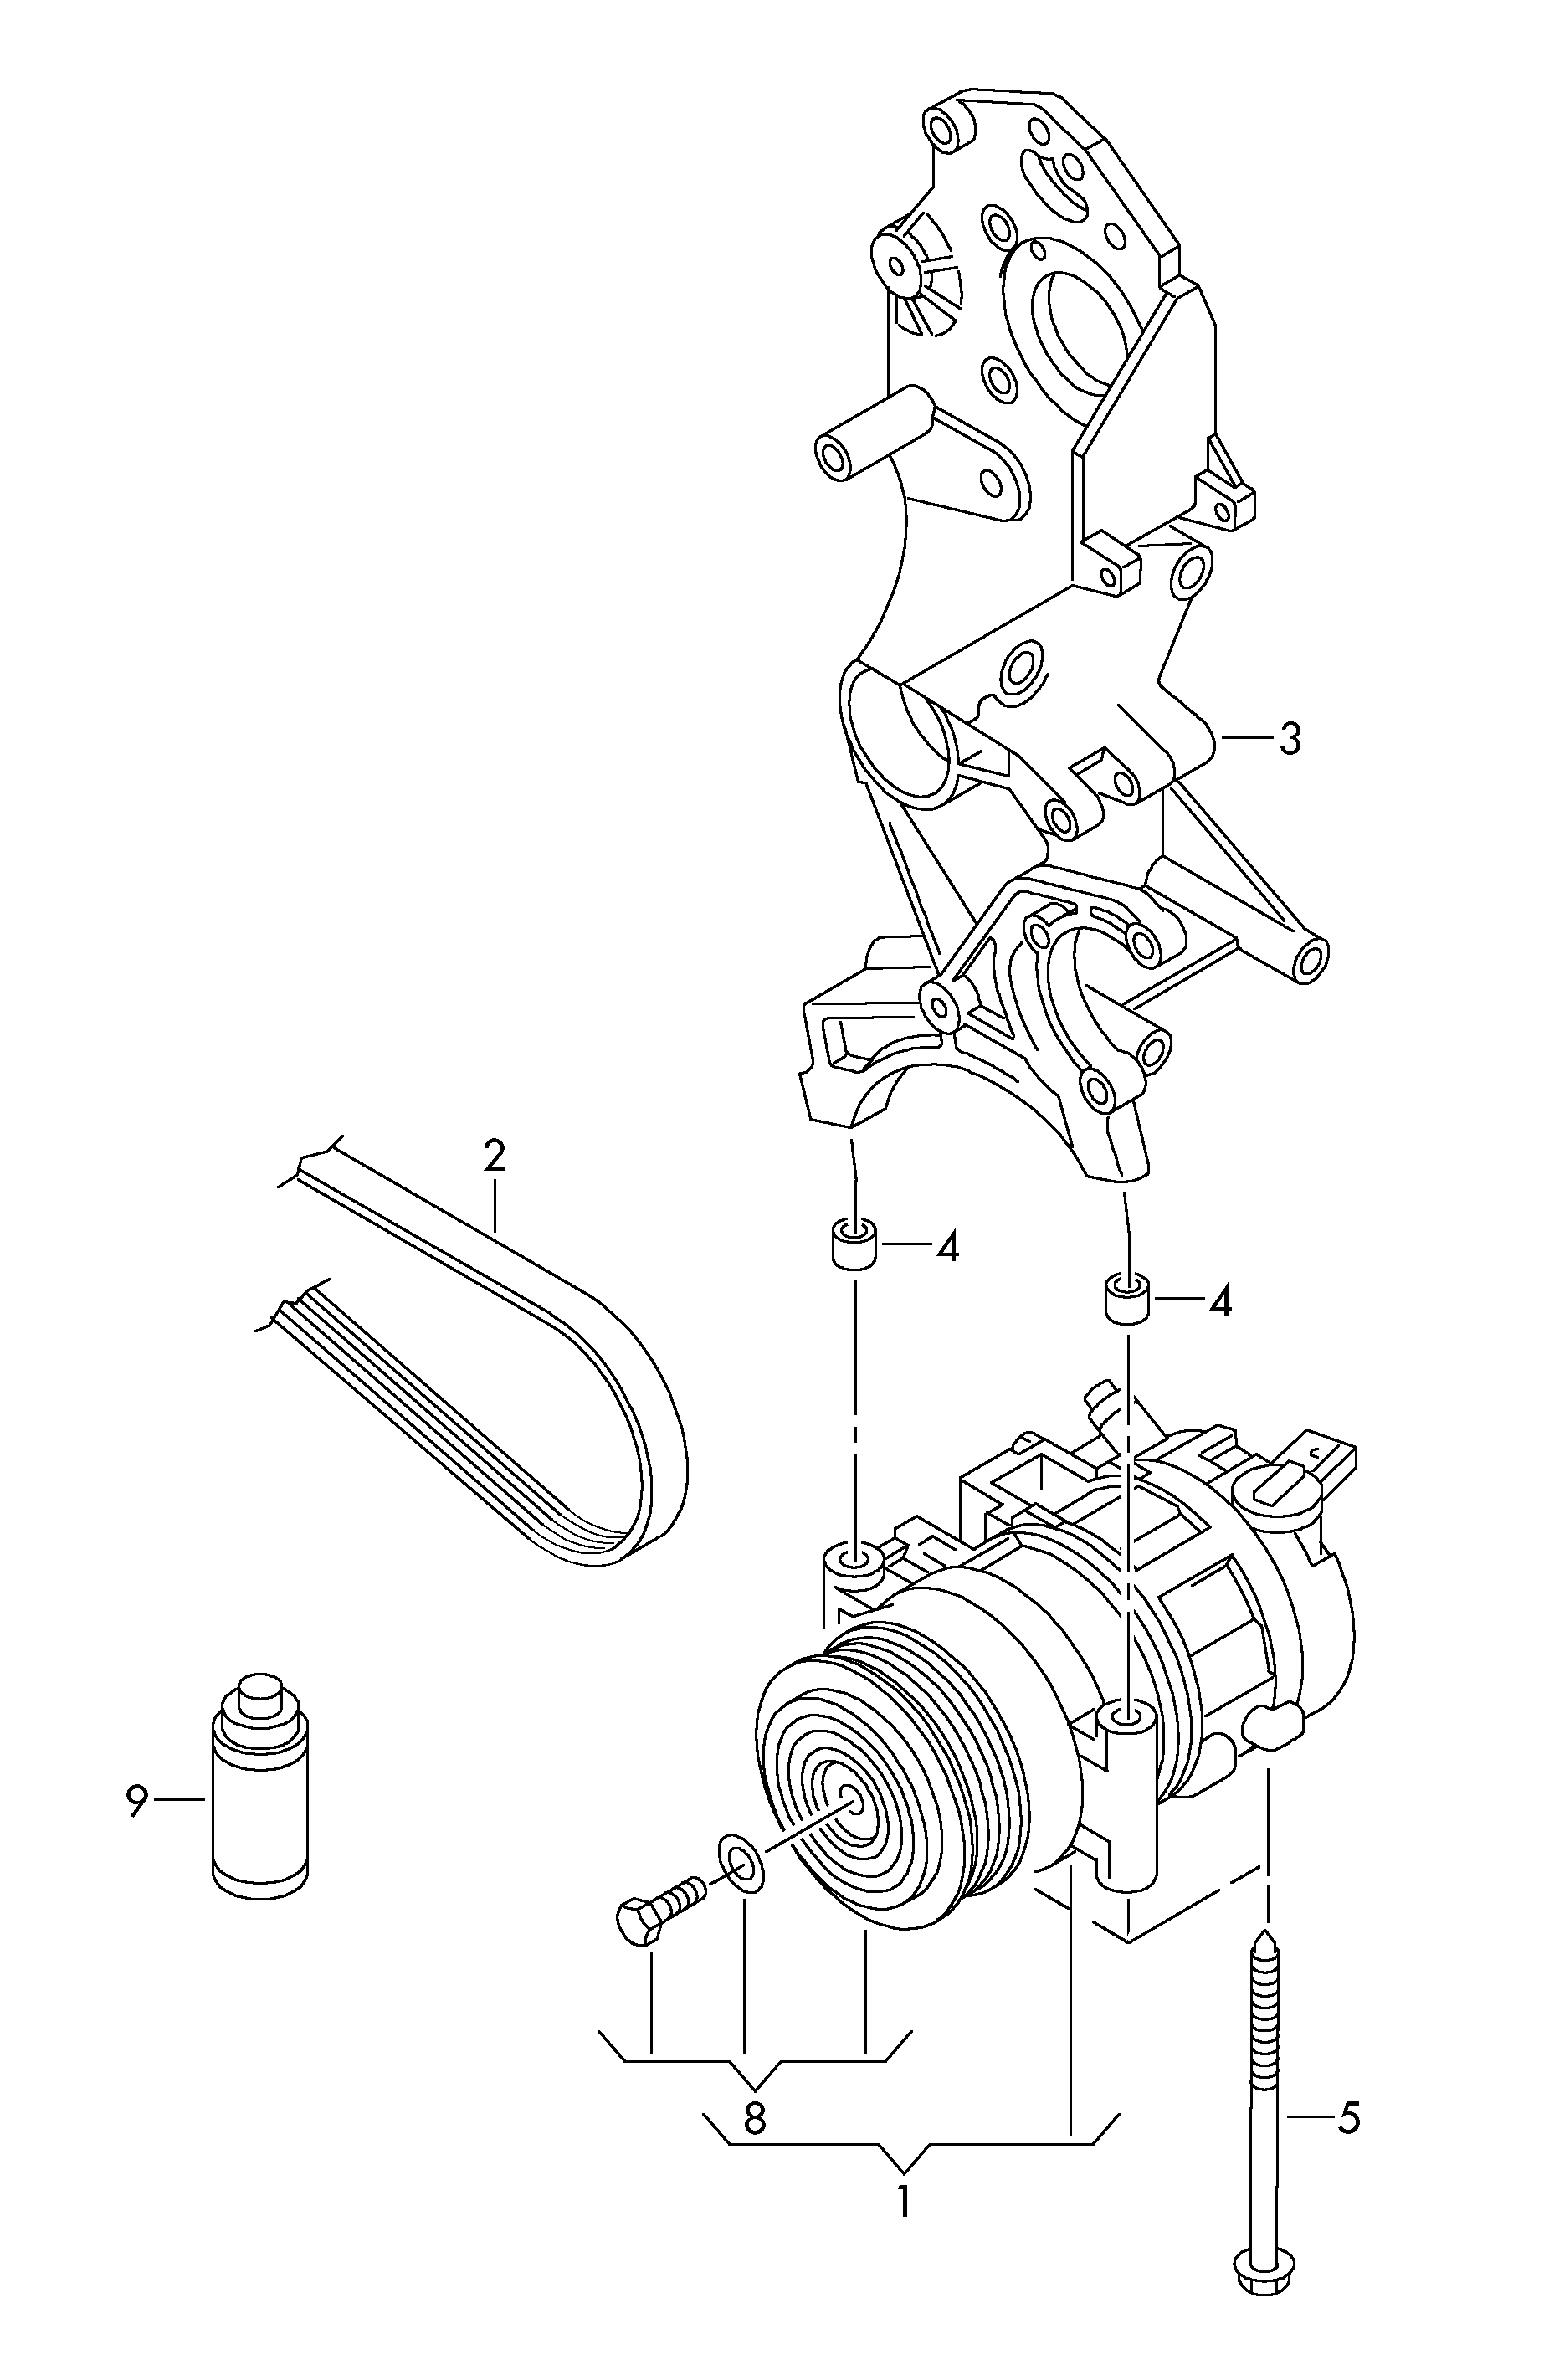 A/C compressorattachment parts for electro-<br>magnetic coupling  - Transporter - tr